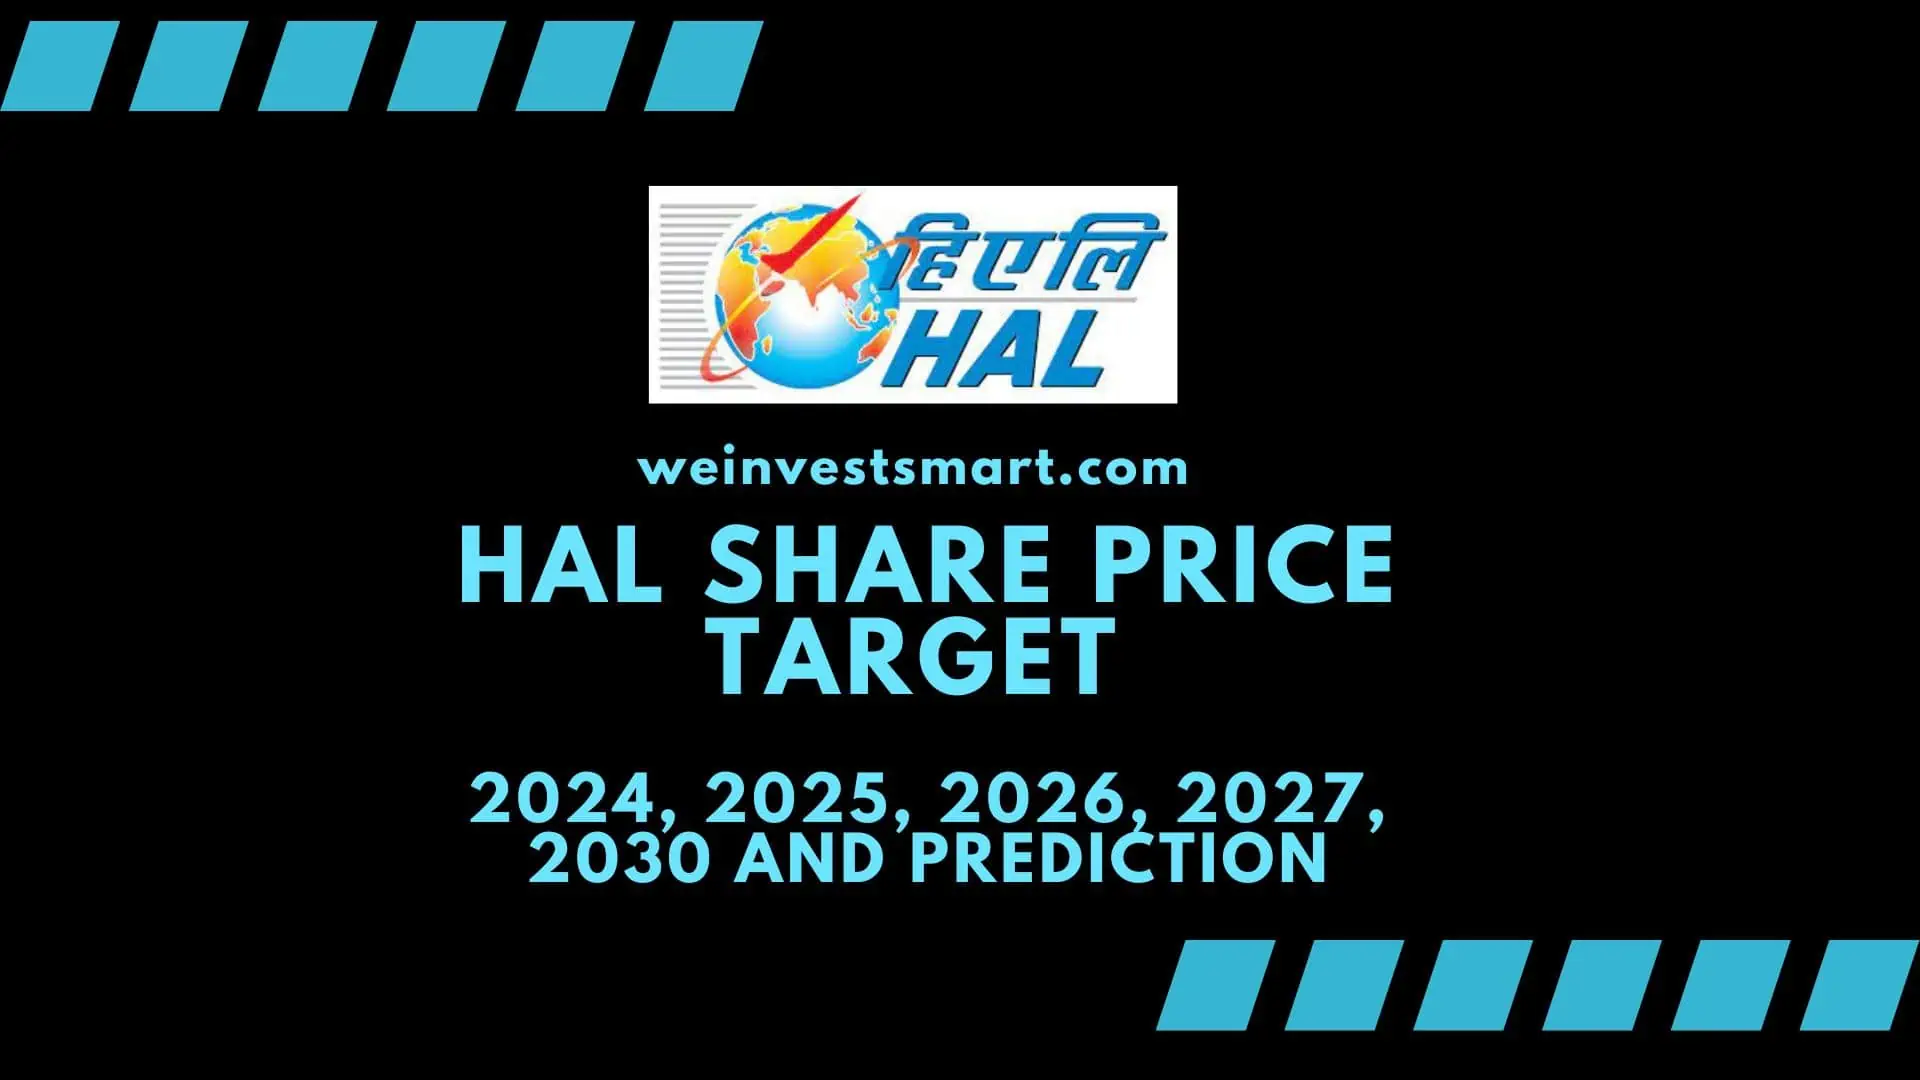 HAL Share Price Target 2024, 2025, 2026, 2027, 2030 and Prediction